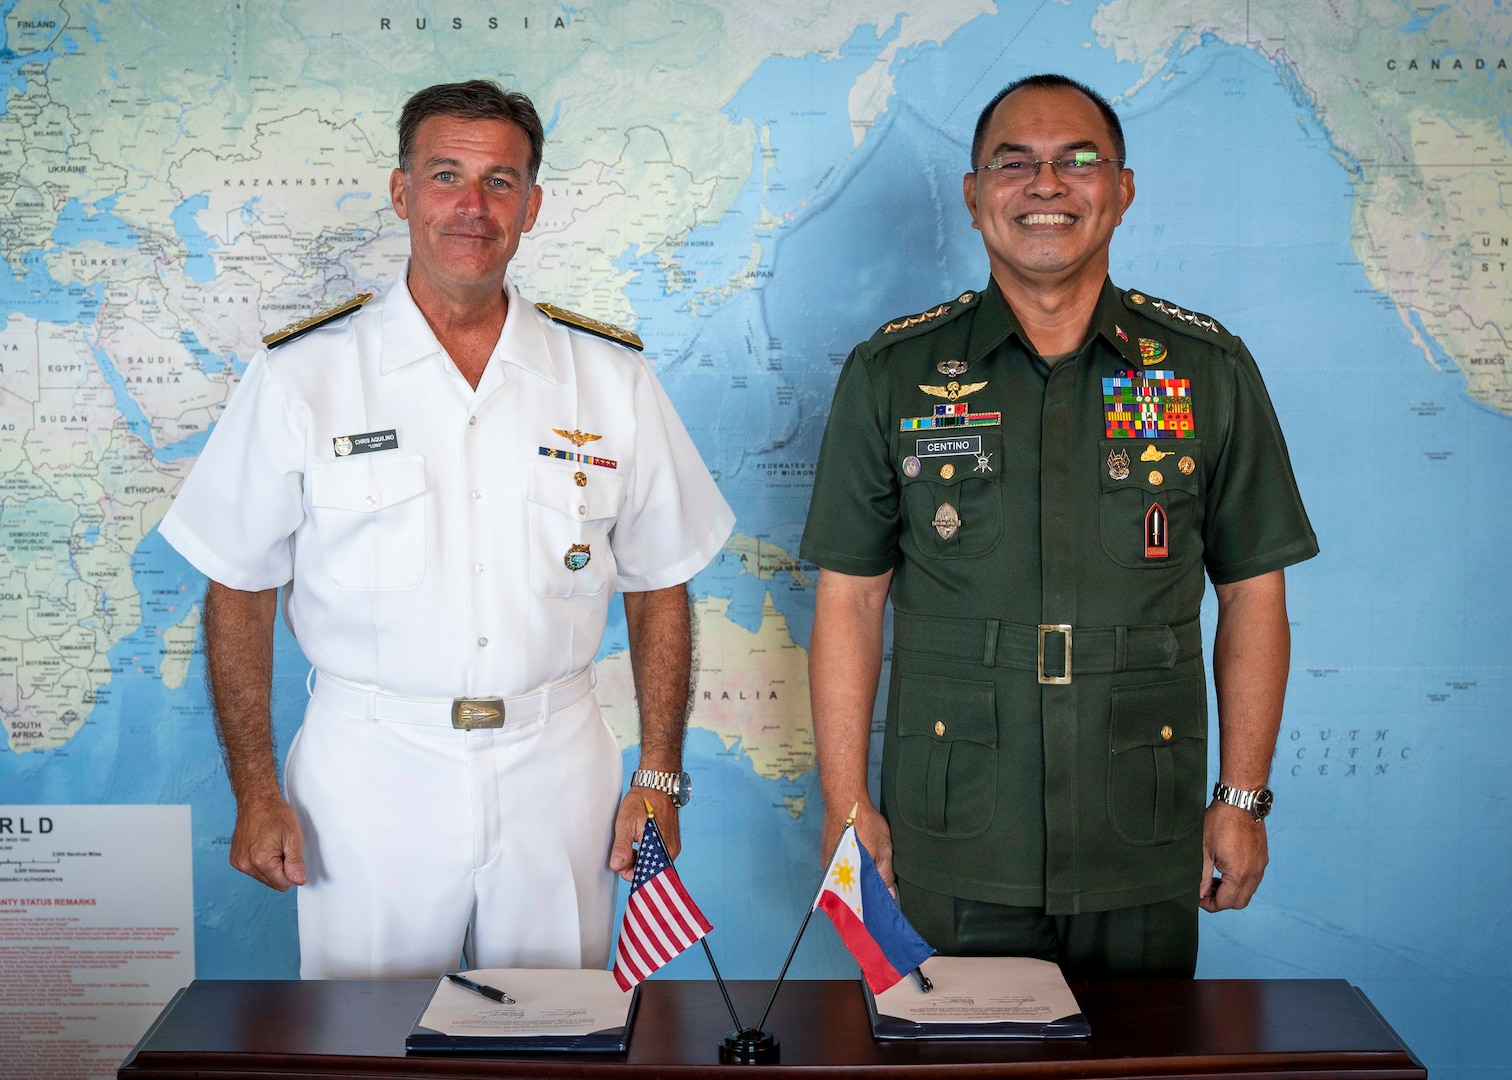 Adm. John C. Aquilino, Commander of U.S. Indo-Pacific Command, left, and Gen. Andres Centino, Chief of Staff of the Armed Forces of the Philippines, pose for a photo after signing the Maritime Security (Bantay Dagat) Framework at USINDOPACOM headquarters.